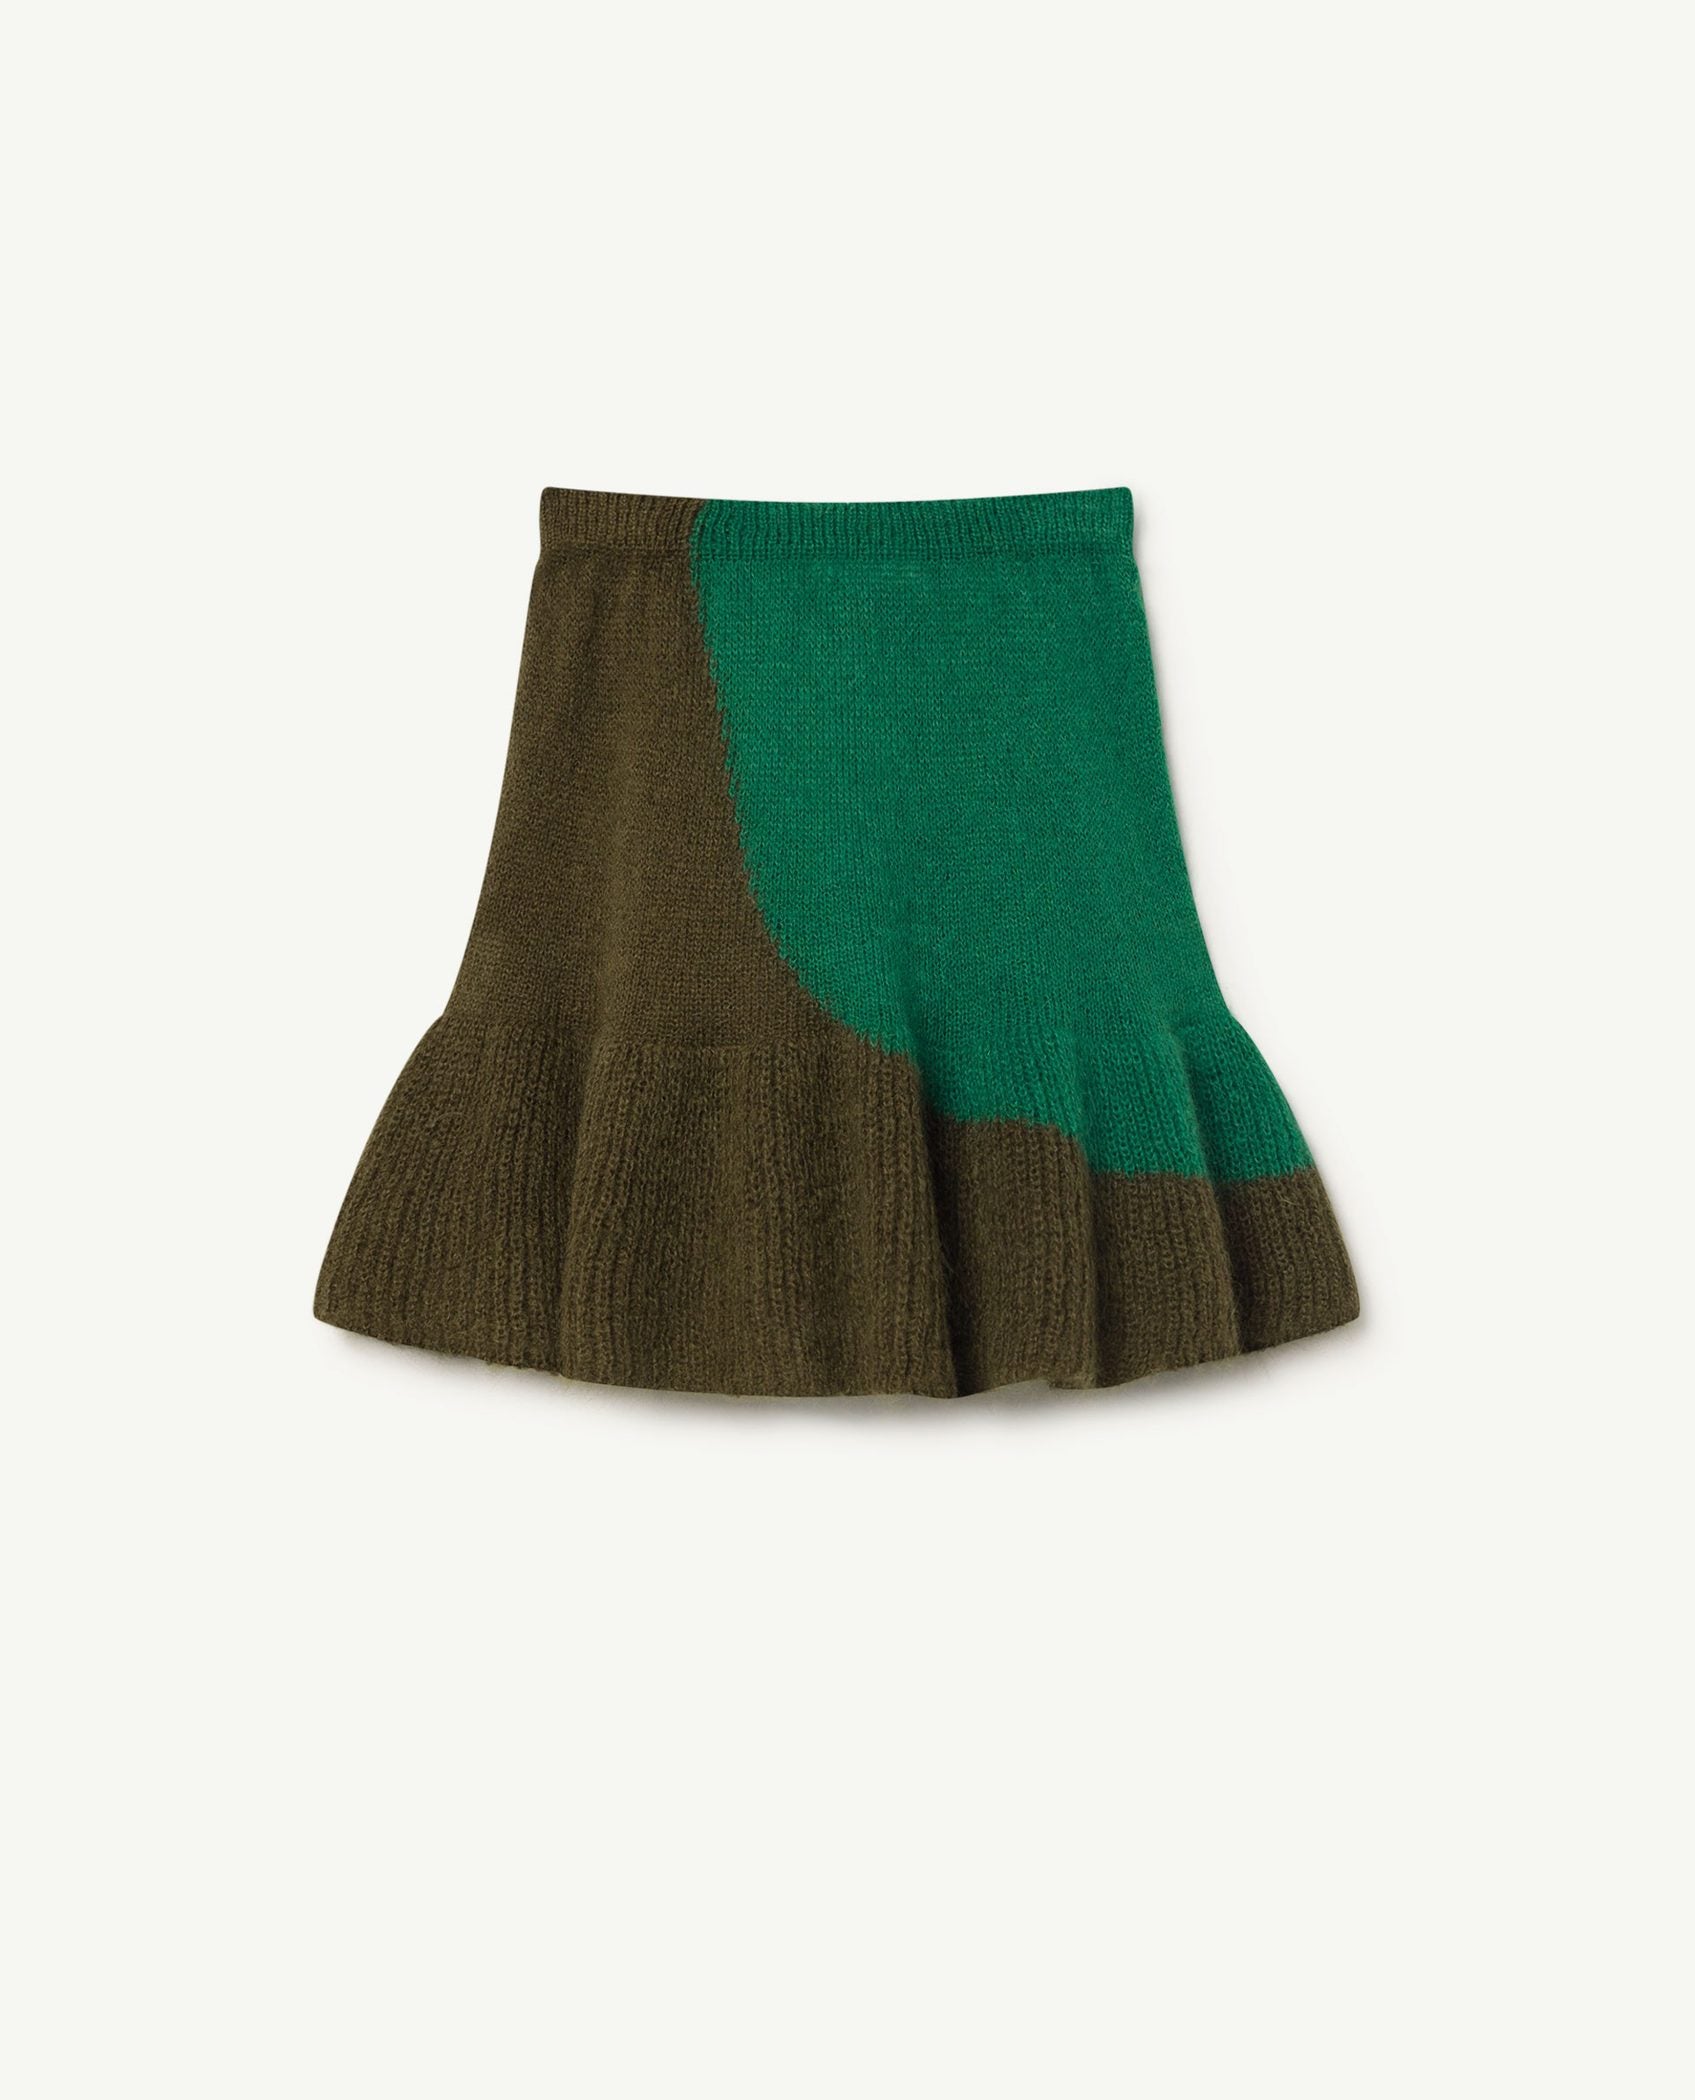 Green Swan Skirt PRODUCT FRONT